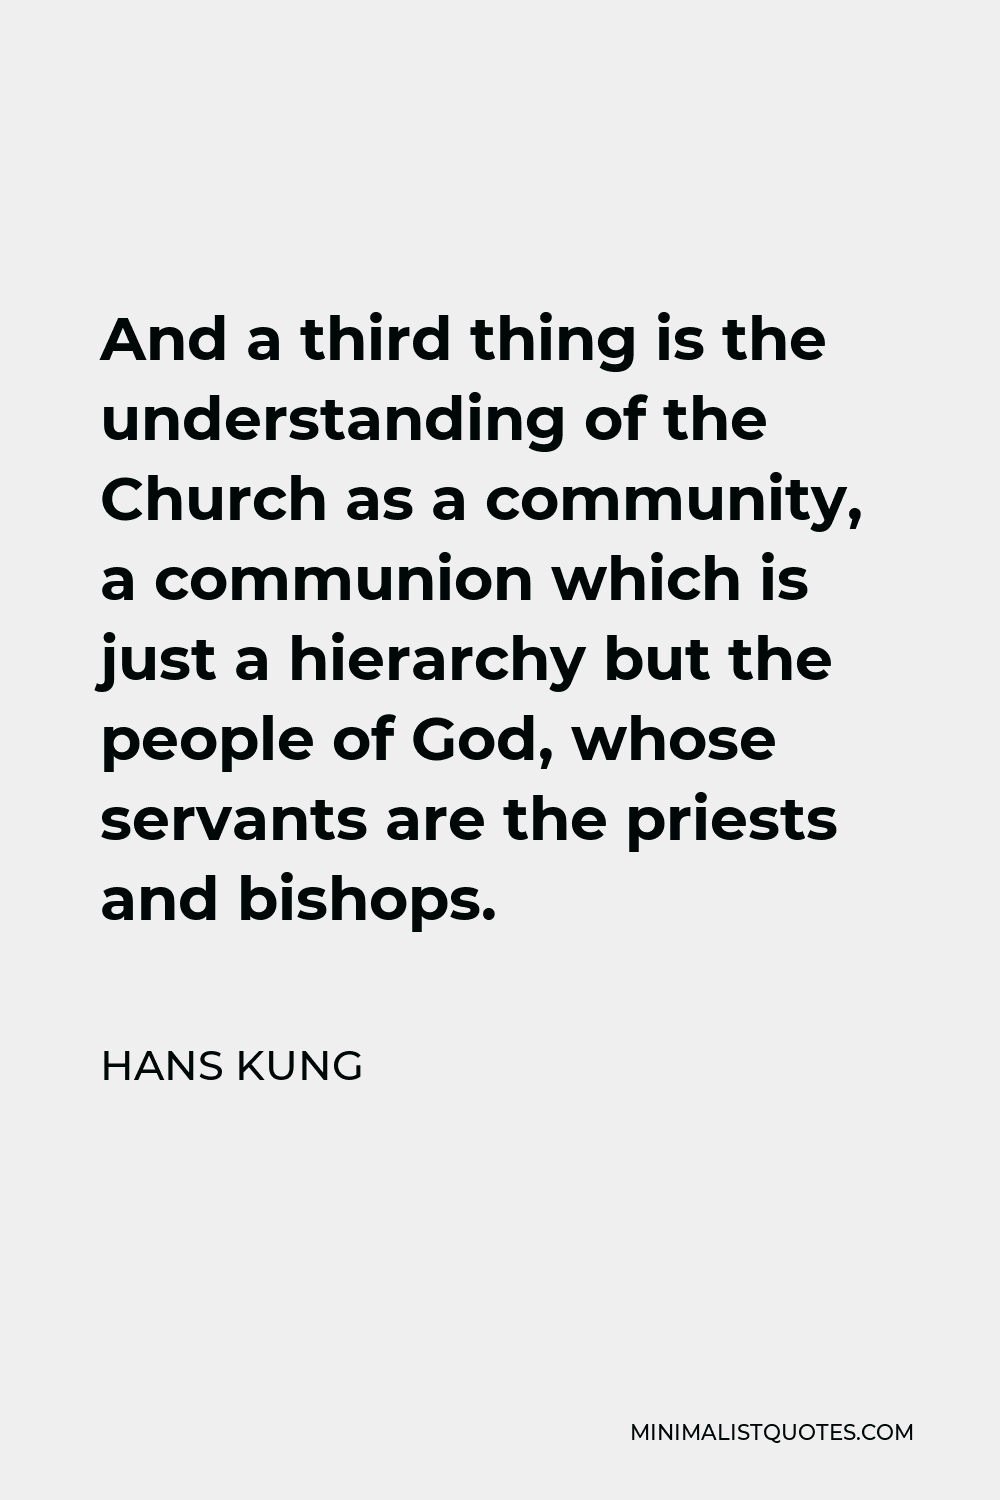 Hans Kung Quote - And a third thing is the understanding of the Church as a community, a communion which is just a hierarchy but the people of God, whose servants are the priests and bishops.